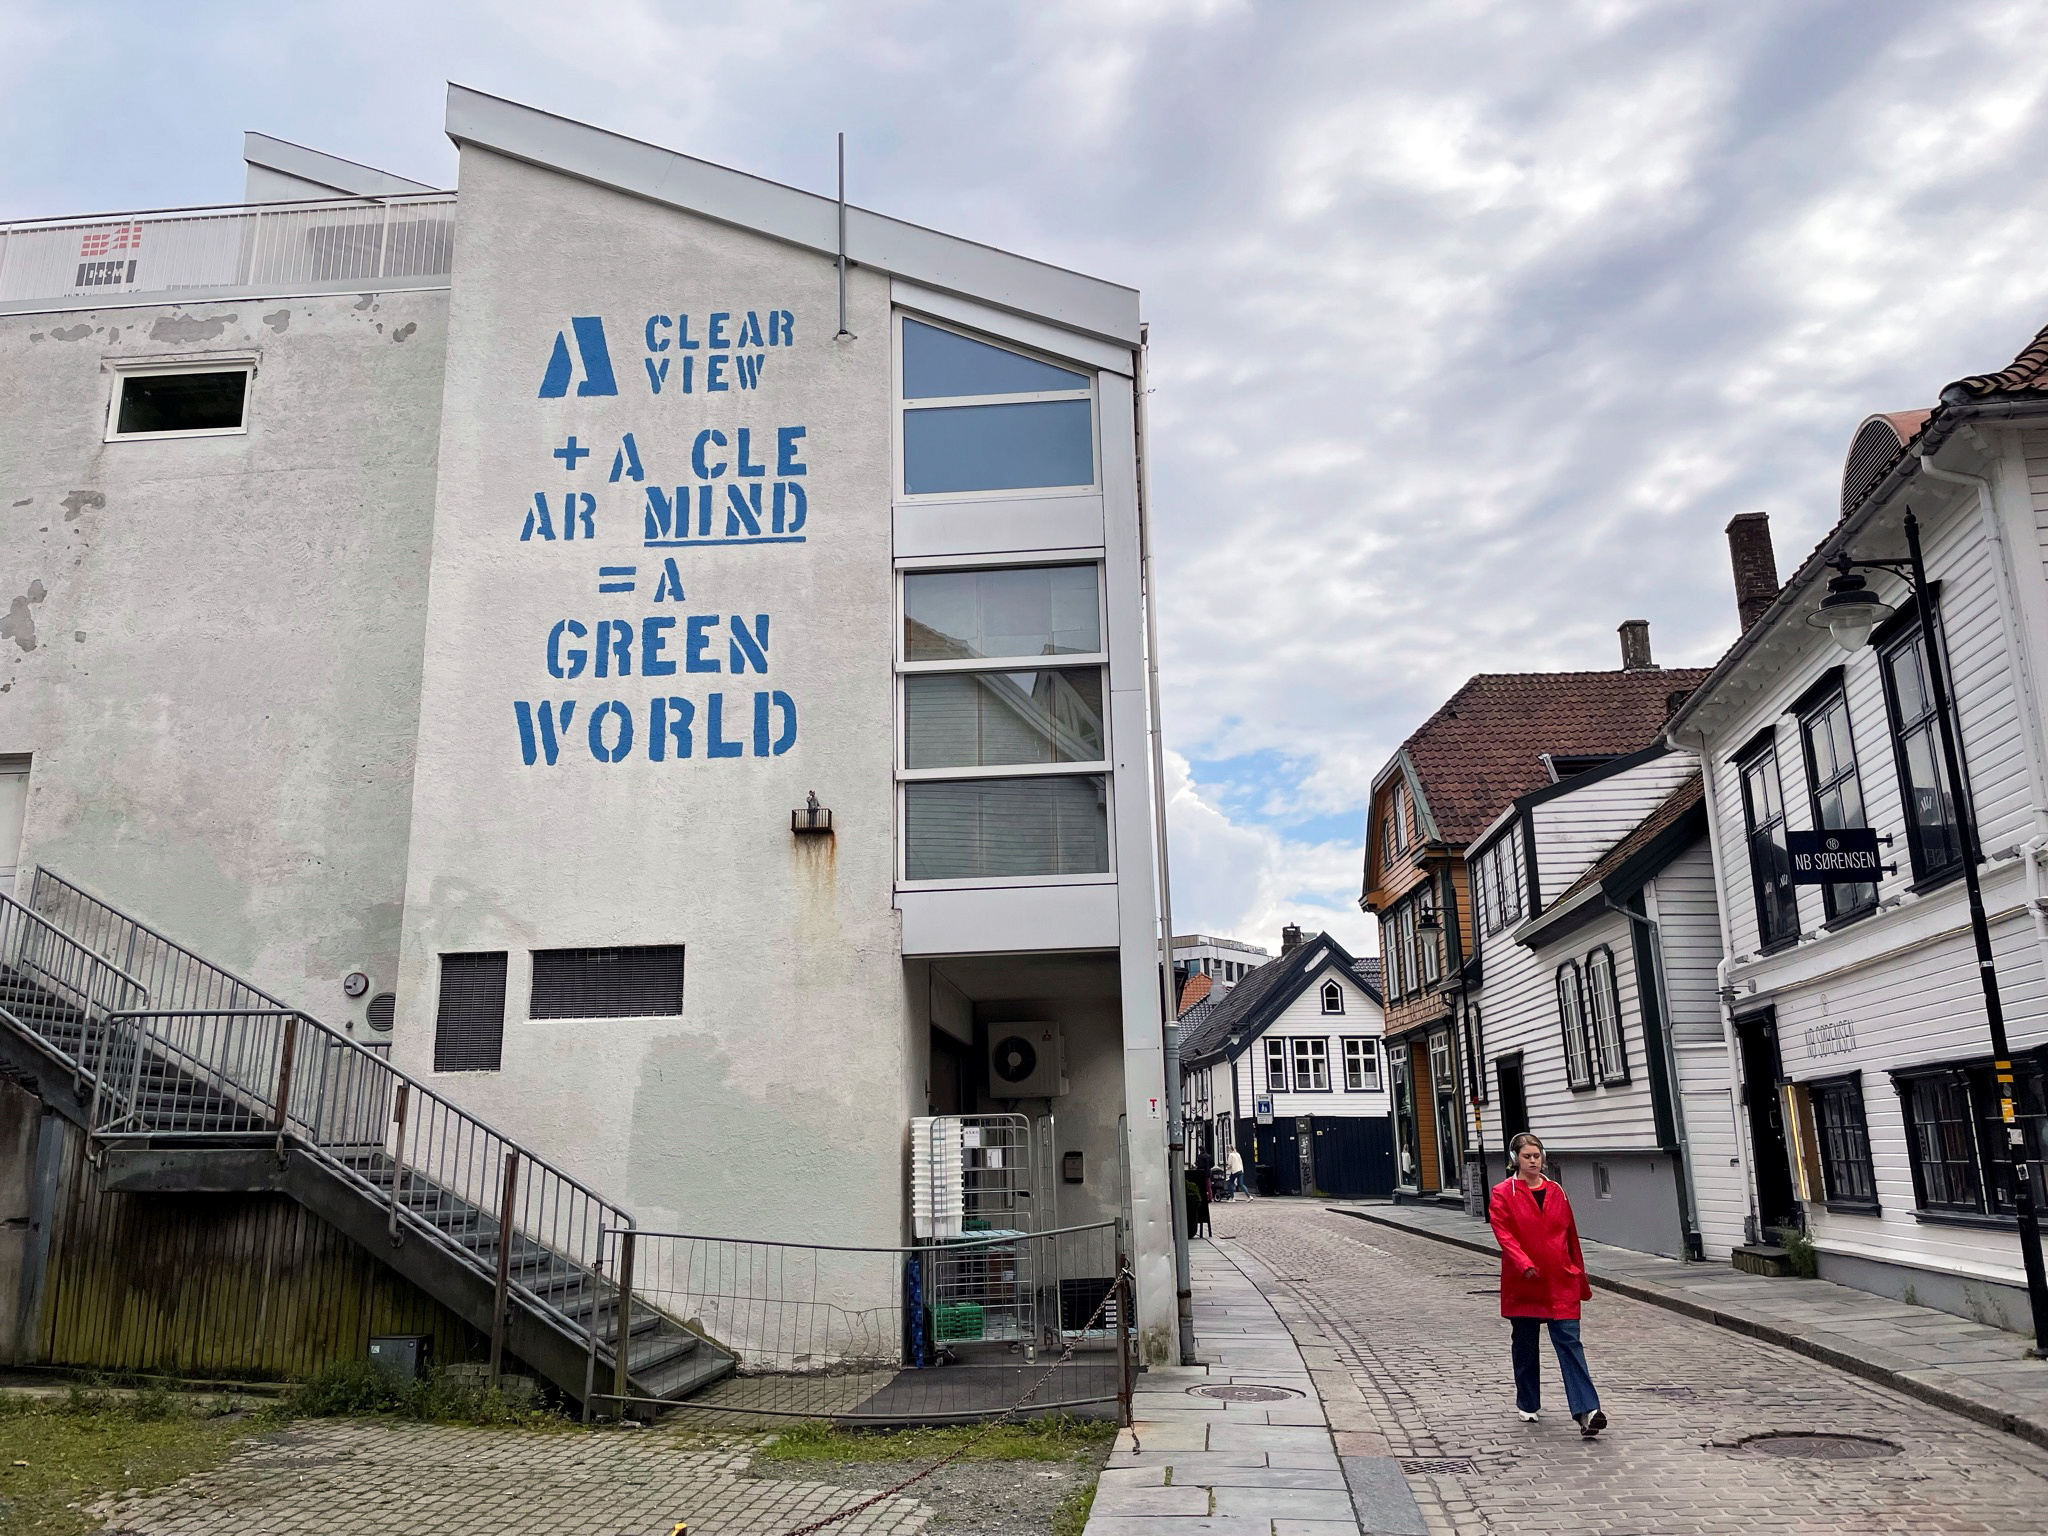 Woman walks past a building in the city of Stavanger